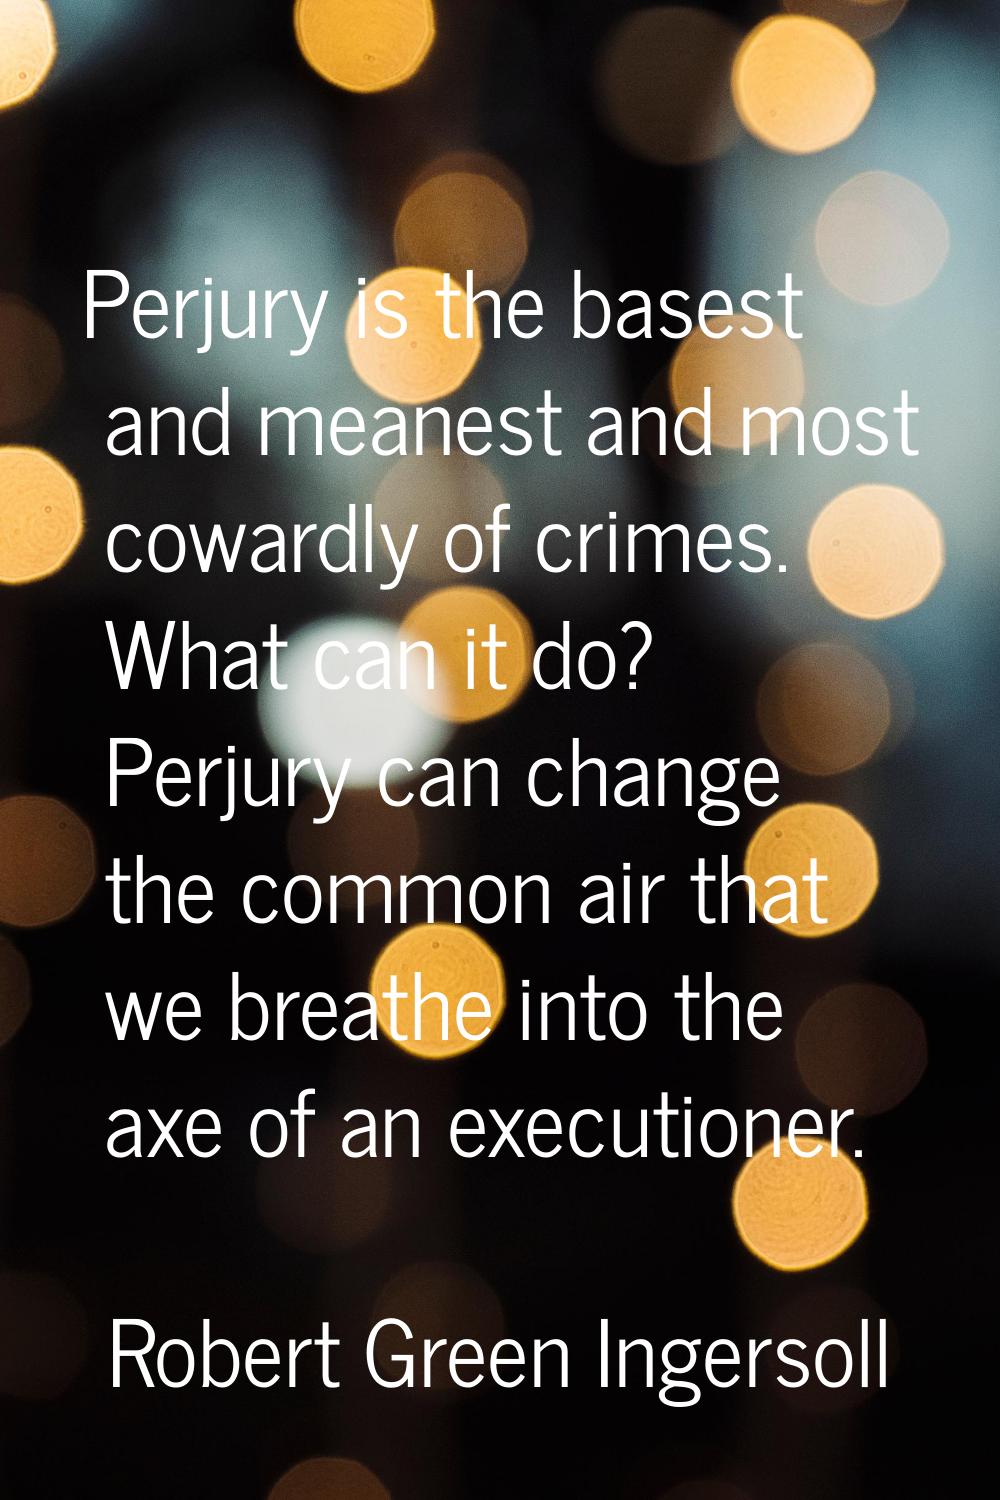 Perjury is the basest and meanest and most cowardly of crimes. What can it do? Perjury can change t